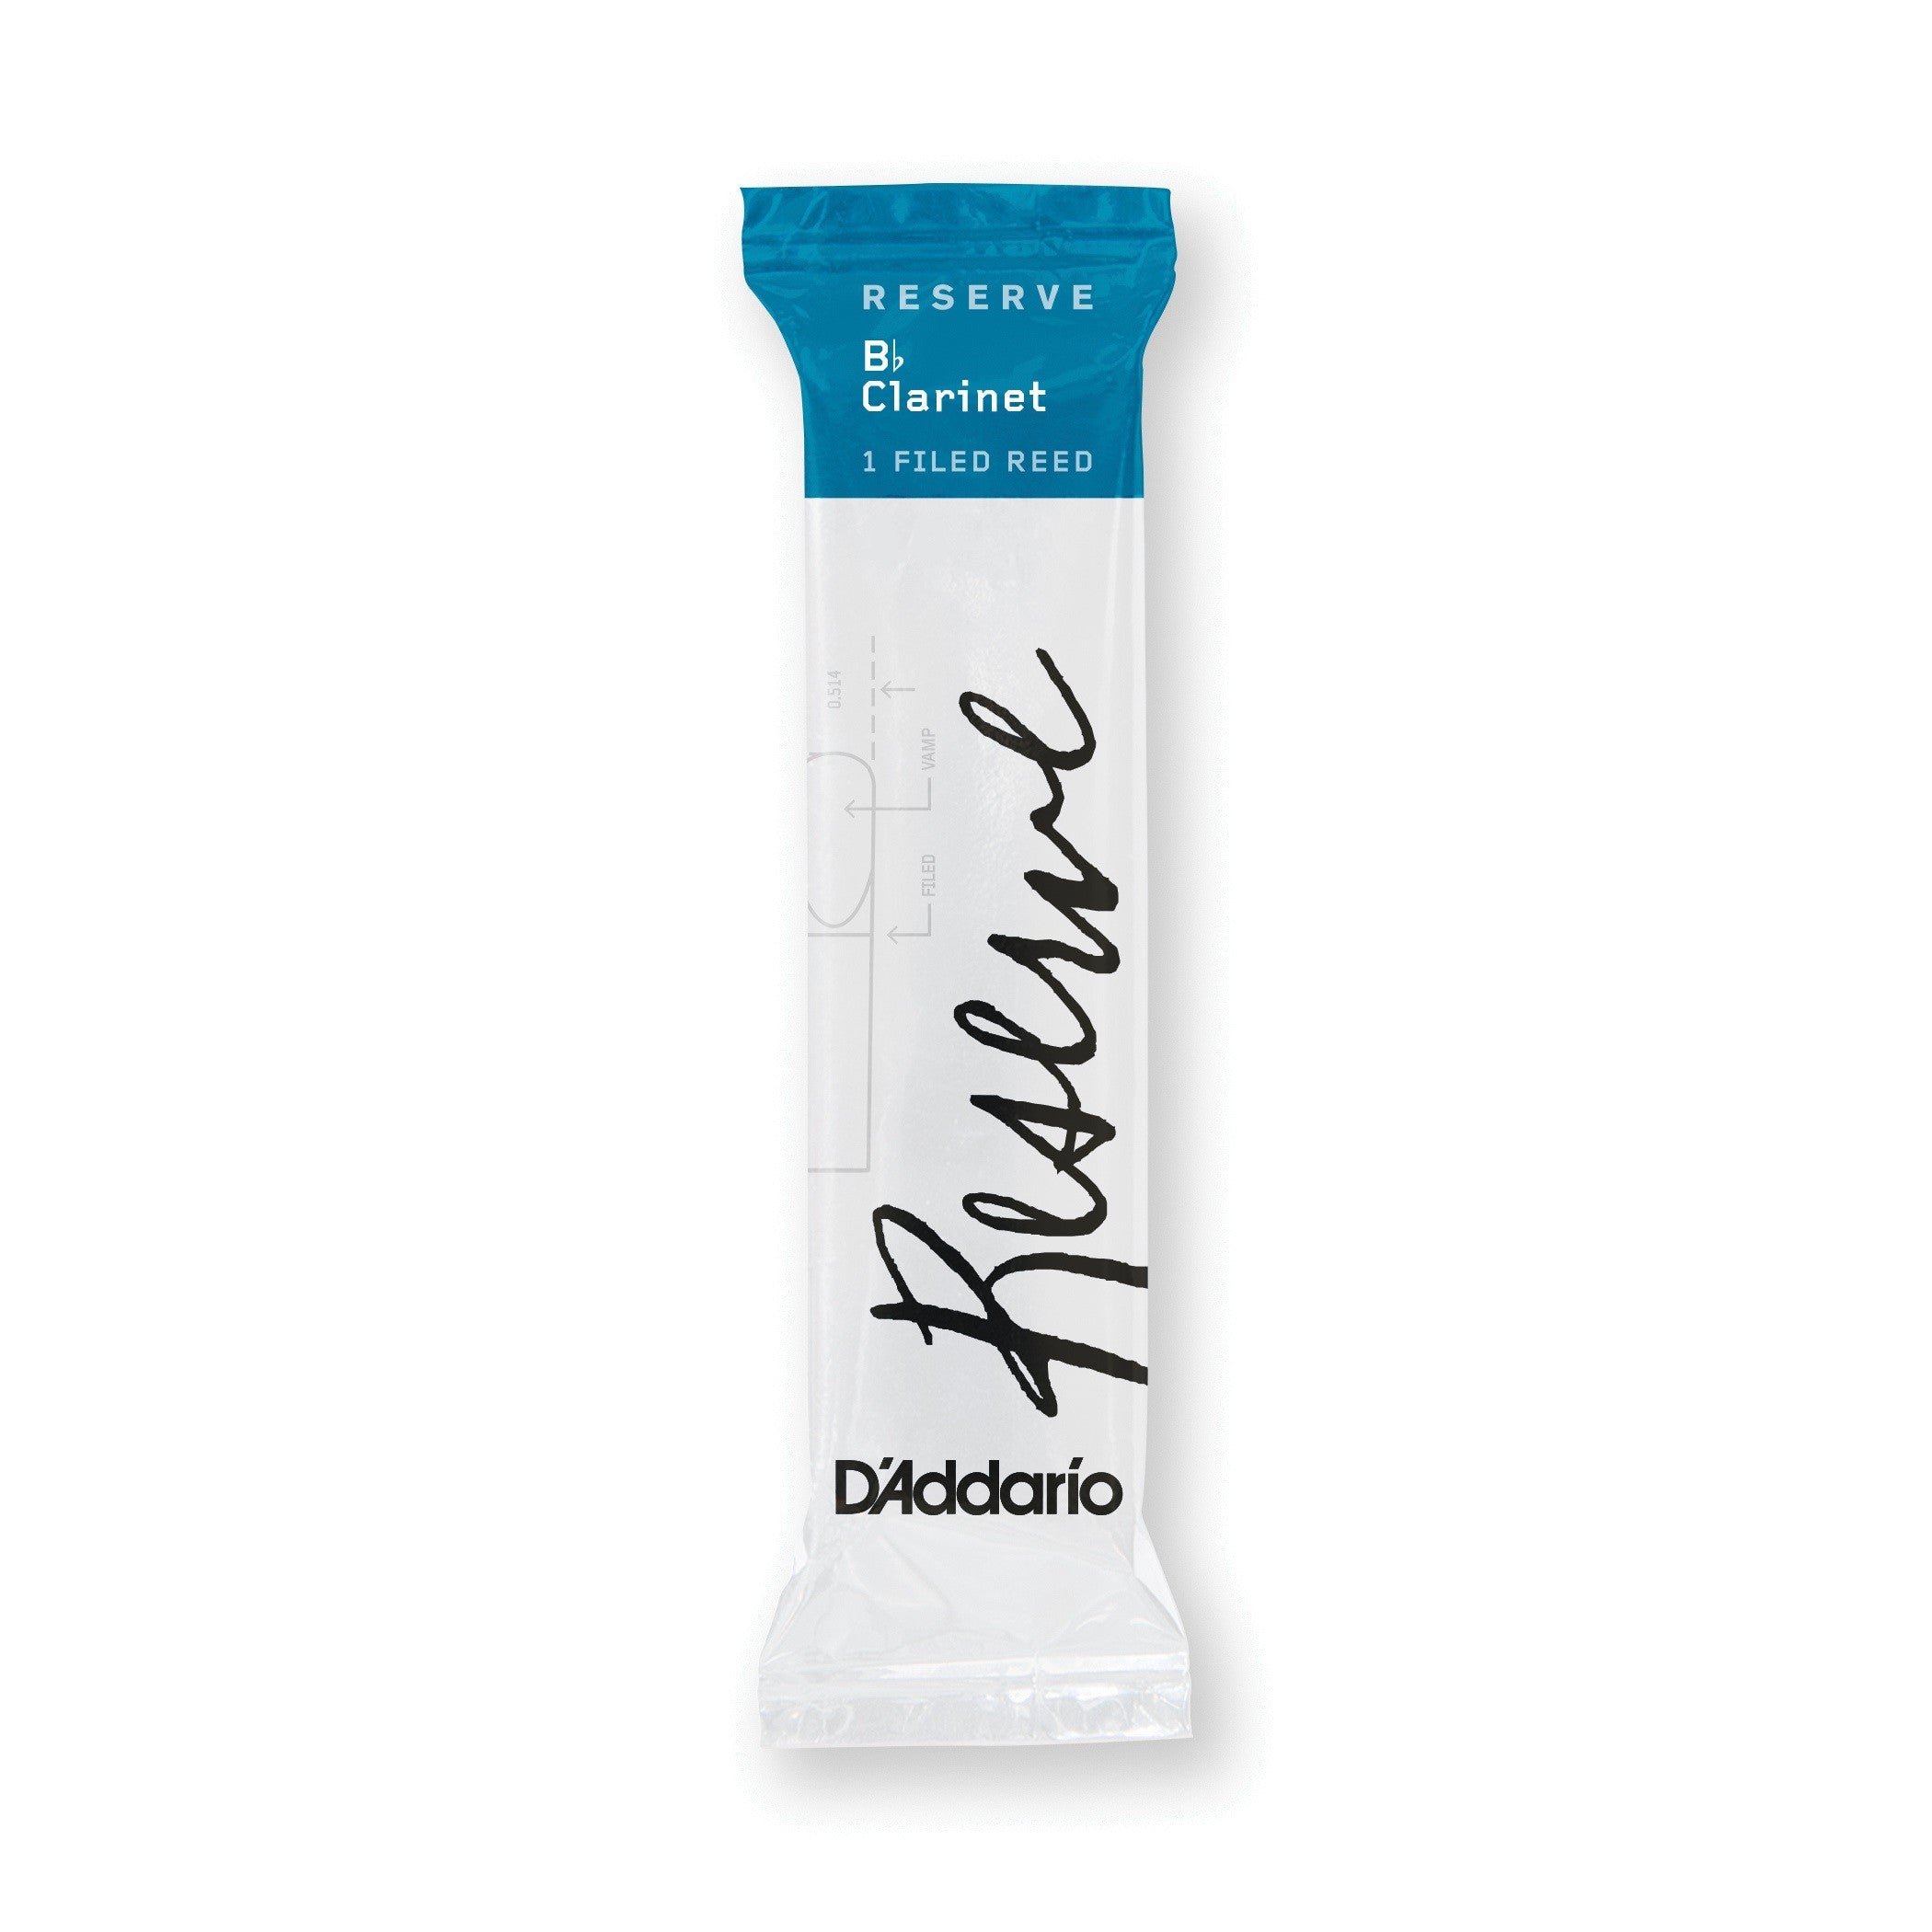 Daddario Reserve 2.5 Strength Clarinet Reed - Each